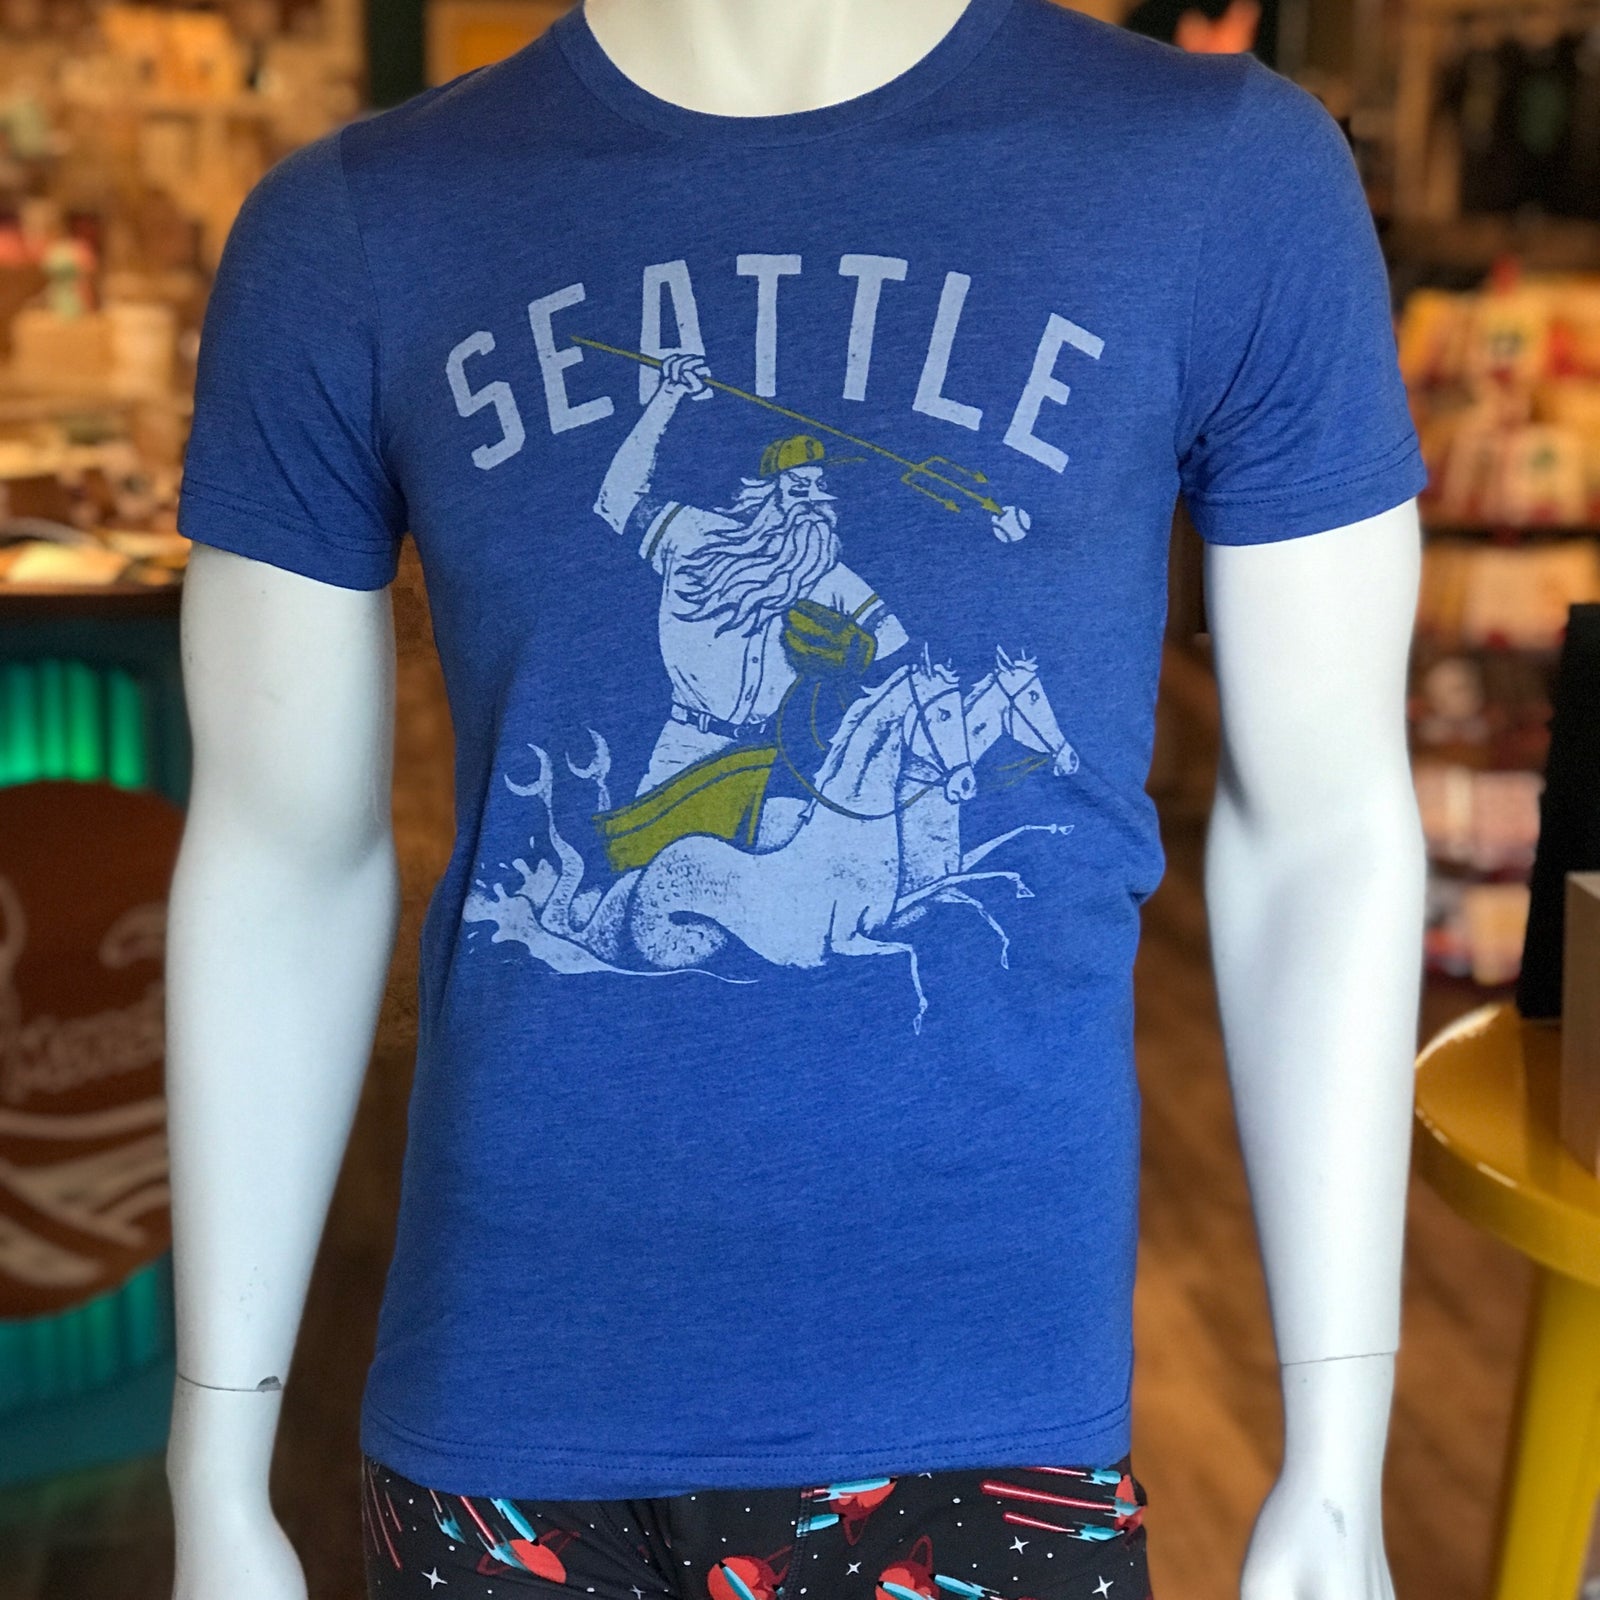 Blue unisex crew t-shirt by Factory 43. It says Seattle and has a mariner wearing a baseball hat and glove and being pulled by two horse mermaids. 